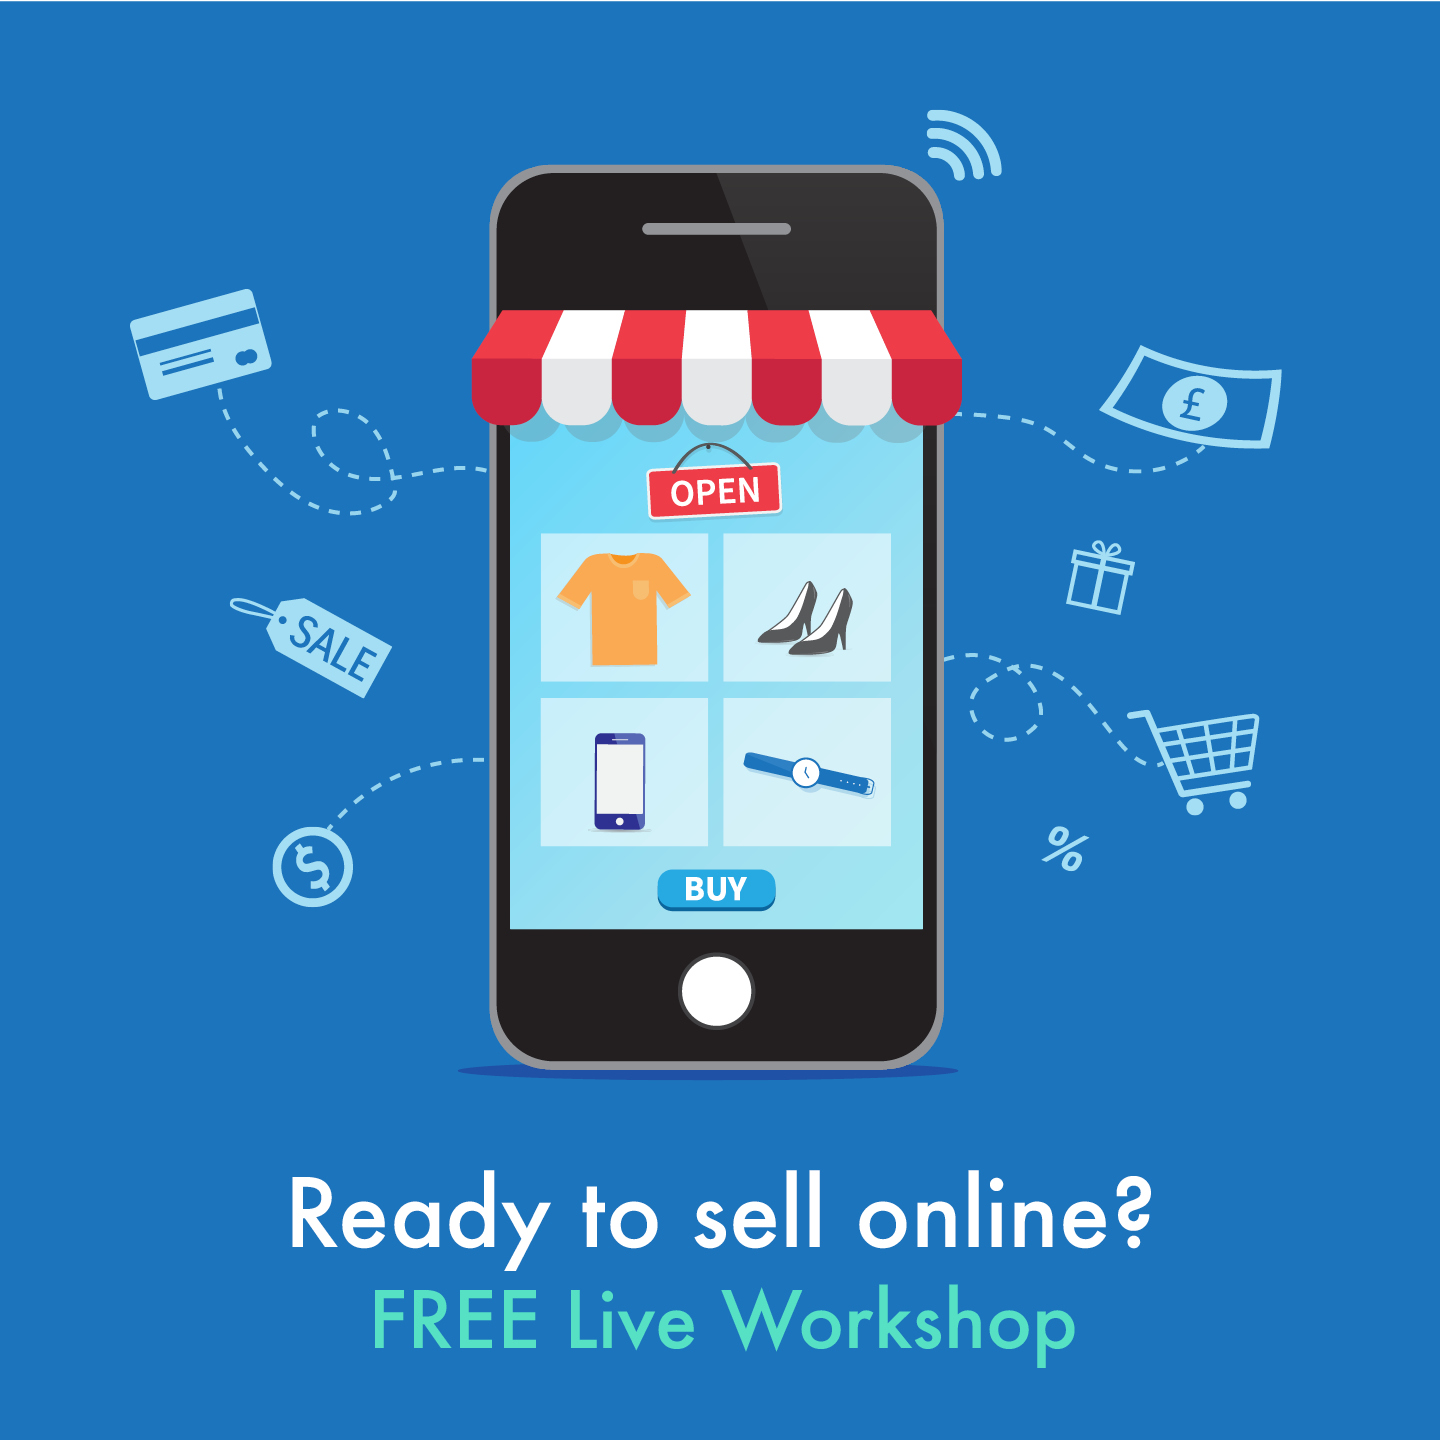 Ready to sell online? FREE live workshop